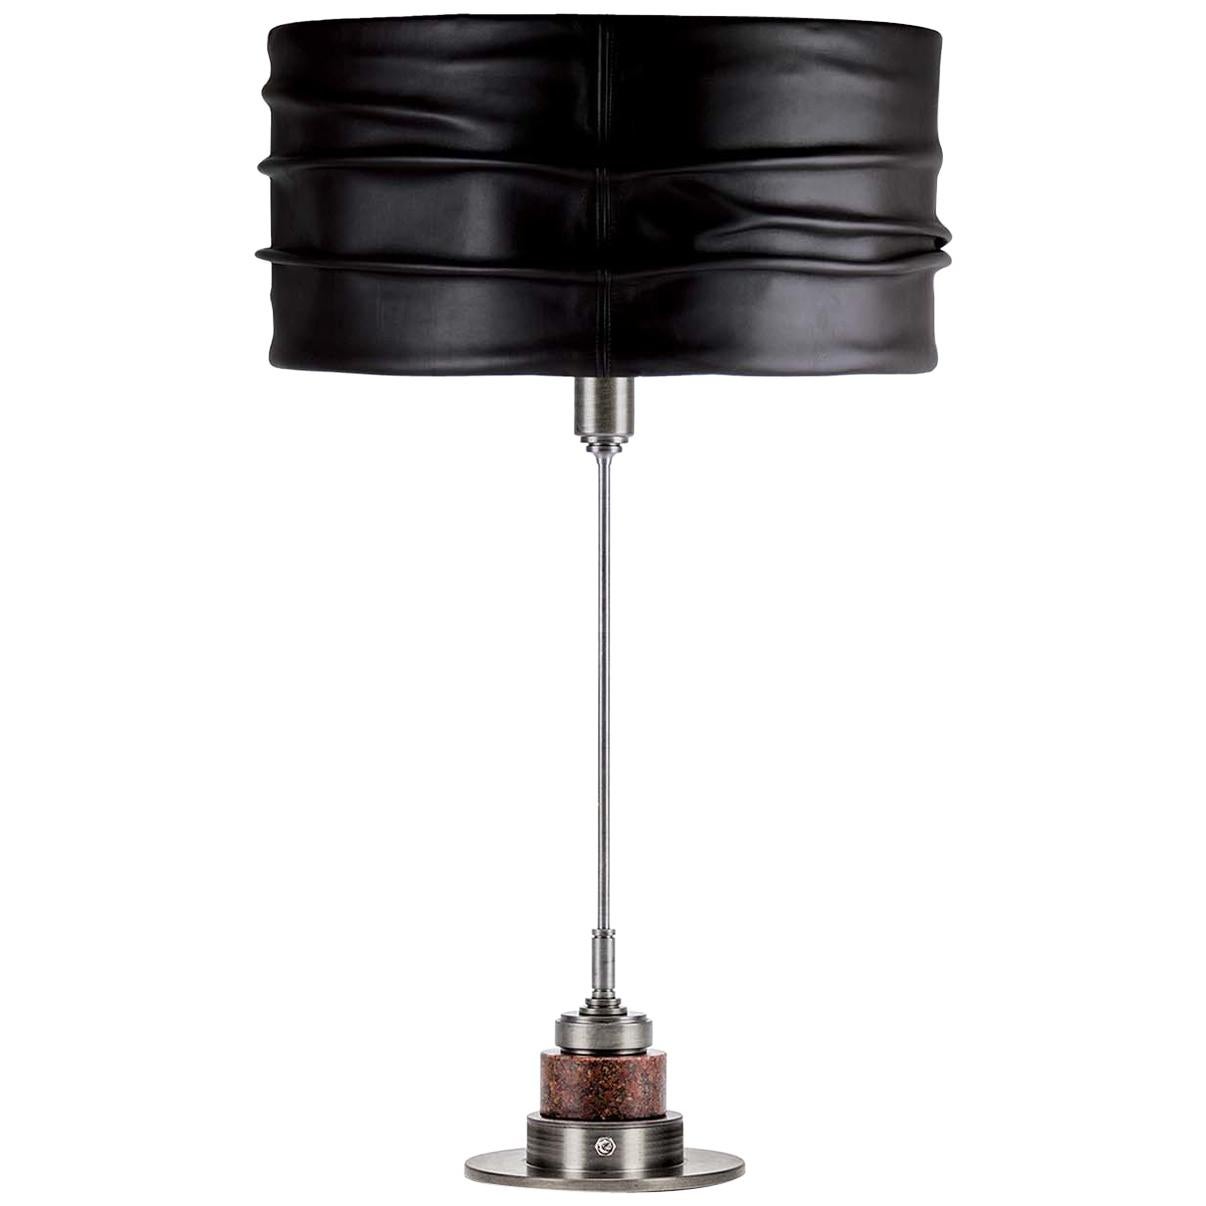 EOS Black Leather Table Lamp by Acanthus